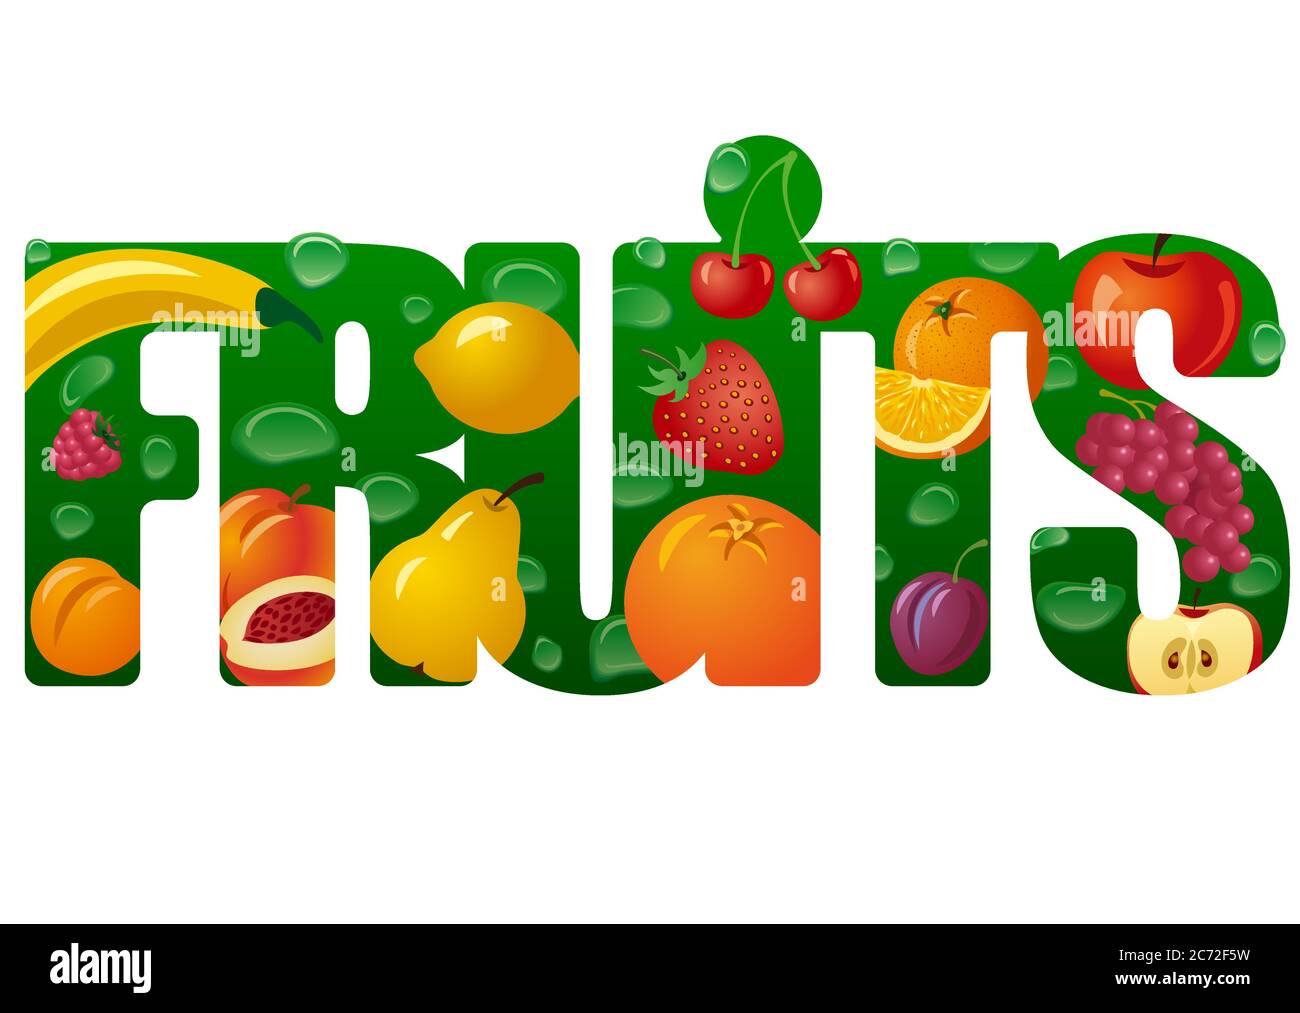 illustration of the signboard with a fruits and berries images Stock Vector